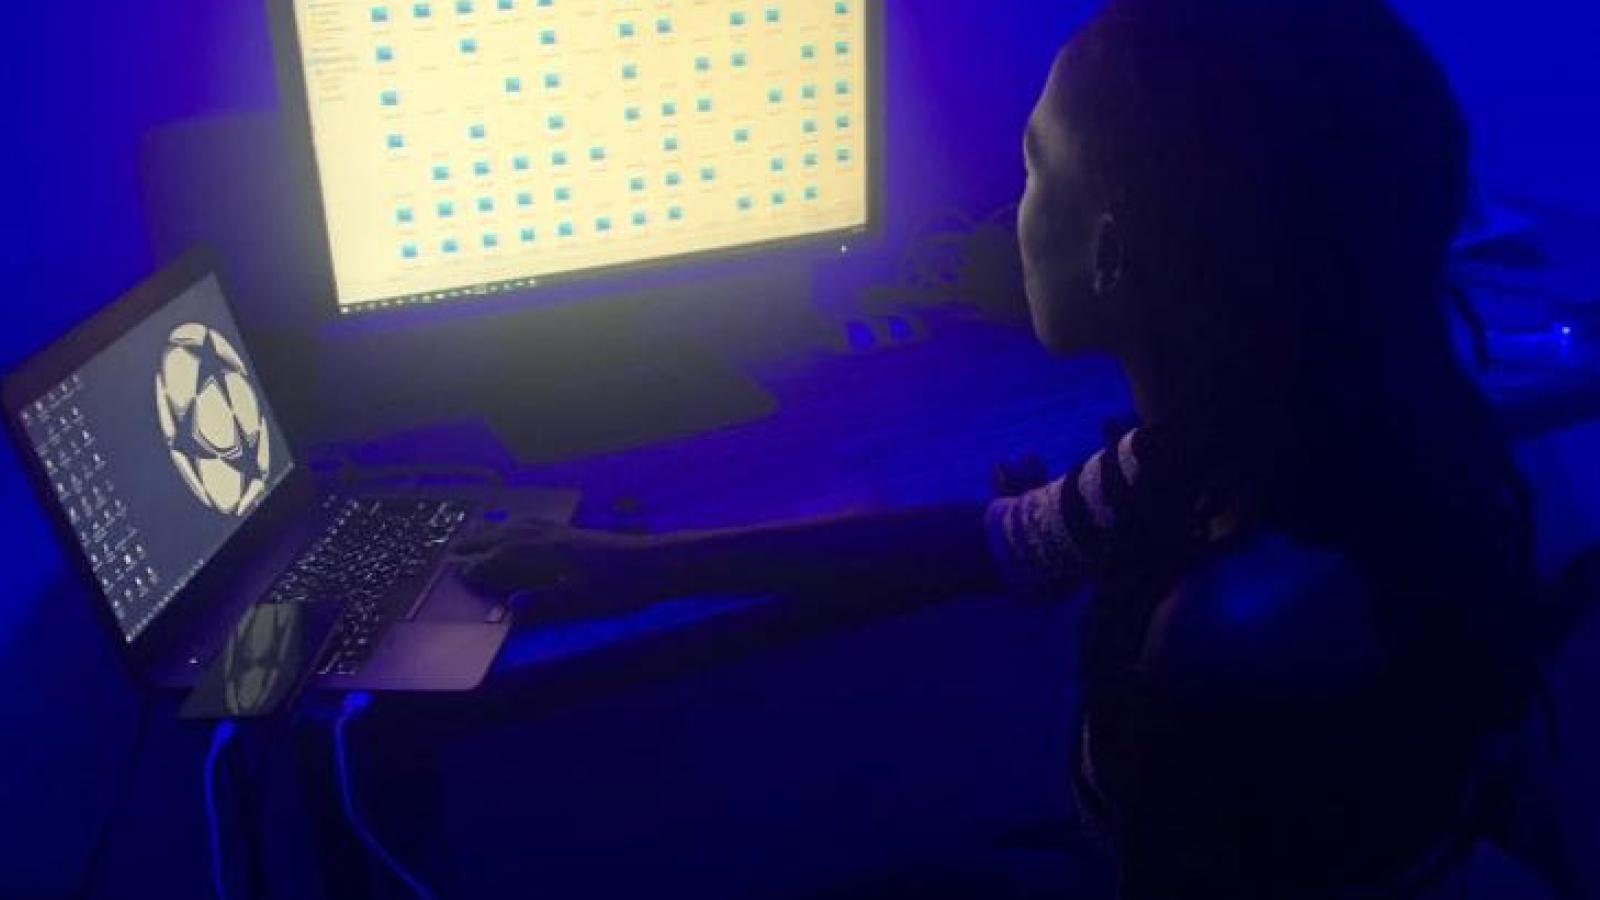 A women looking at screens against a blue background